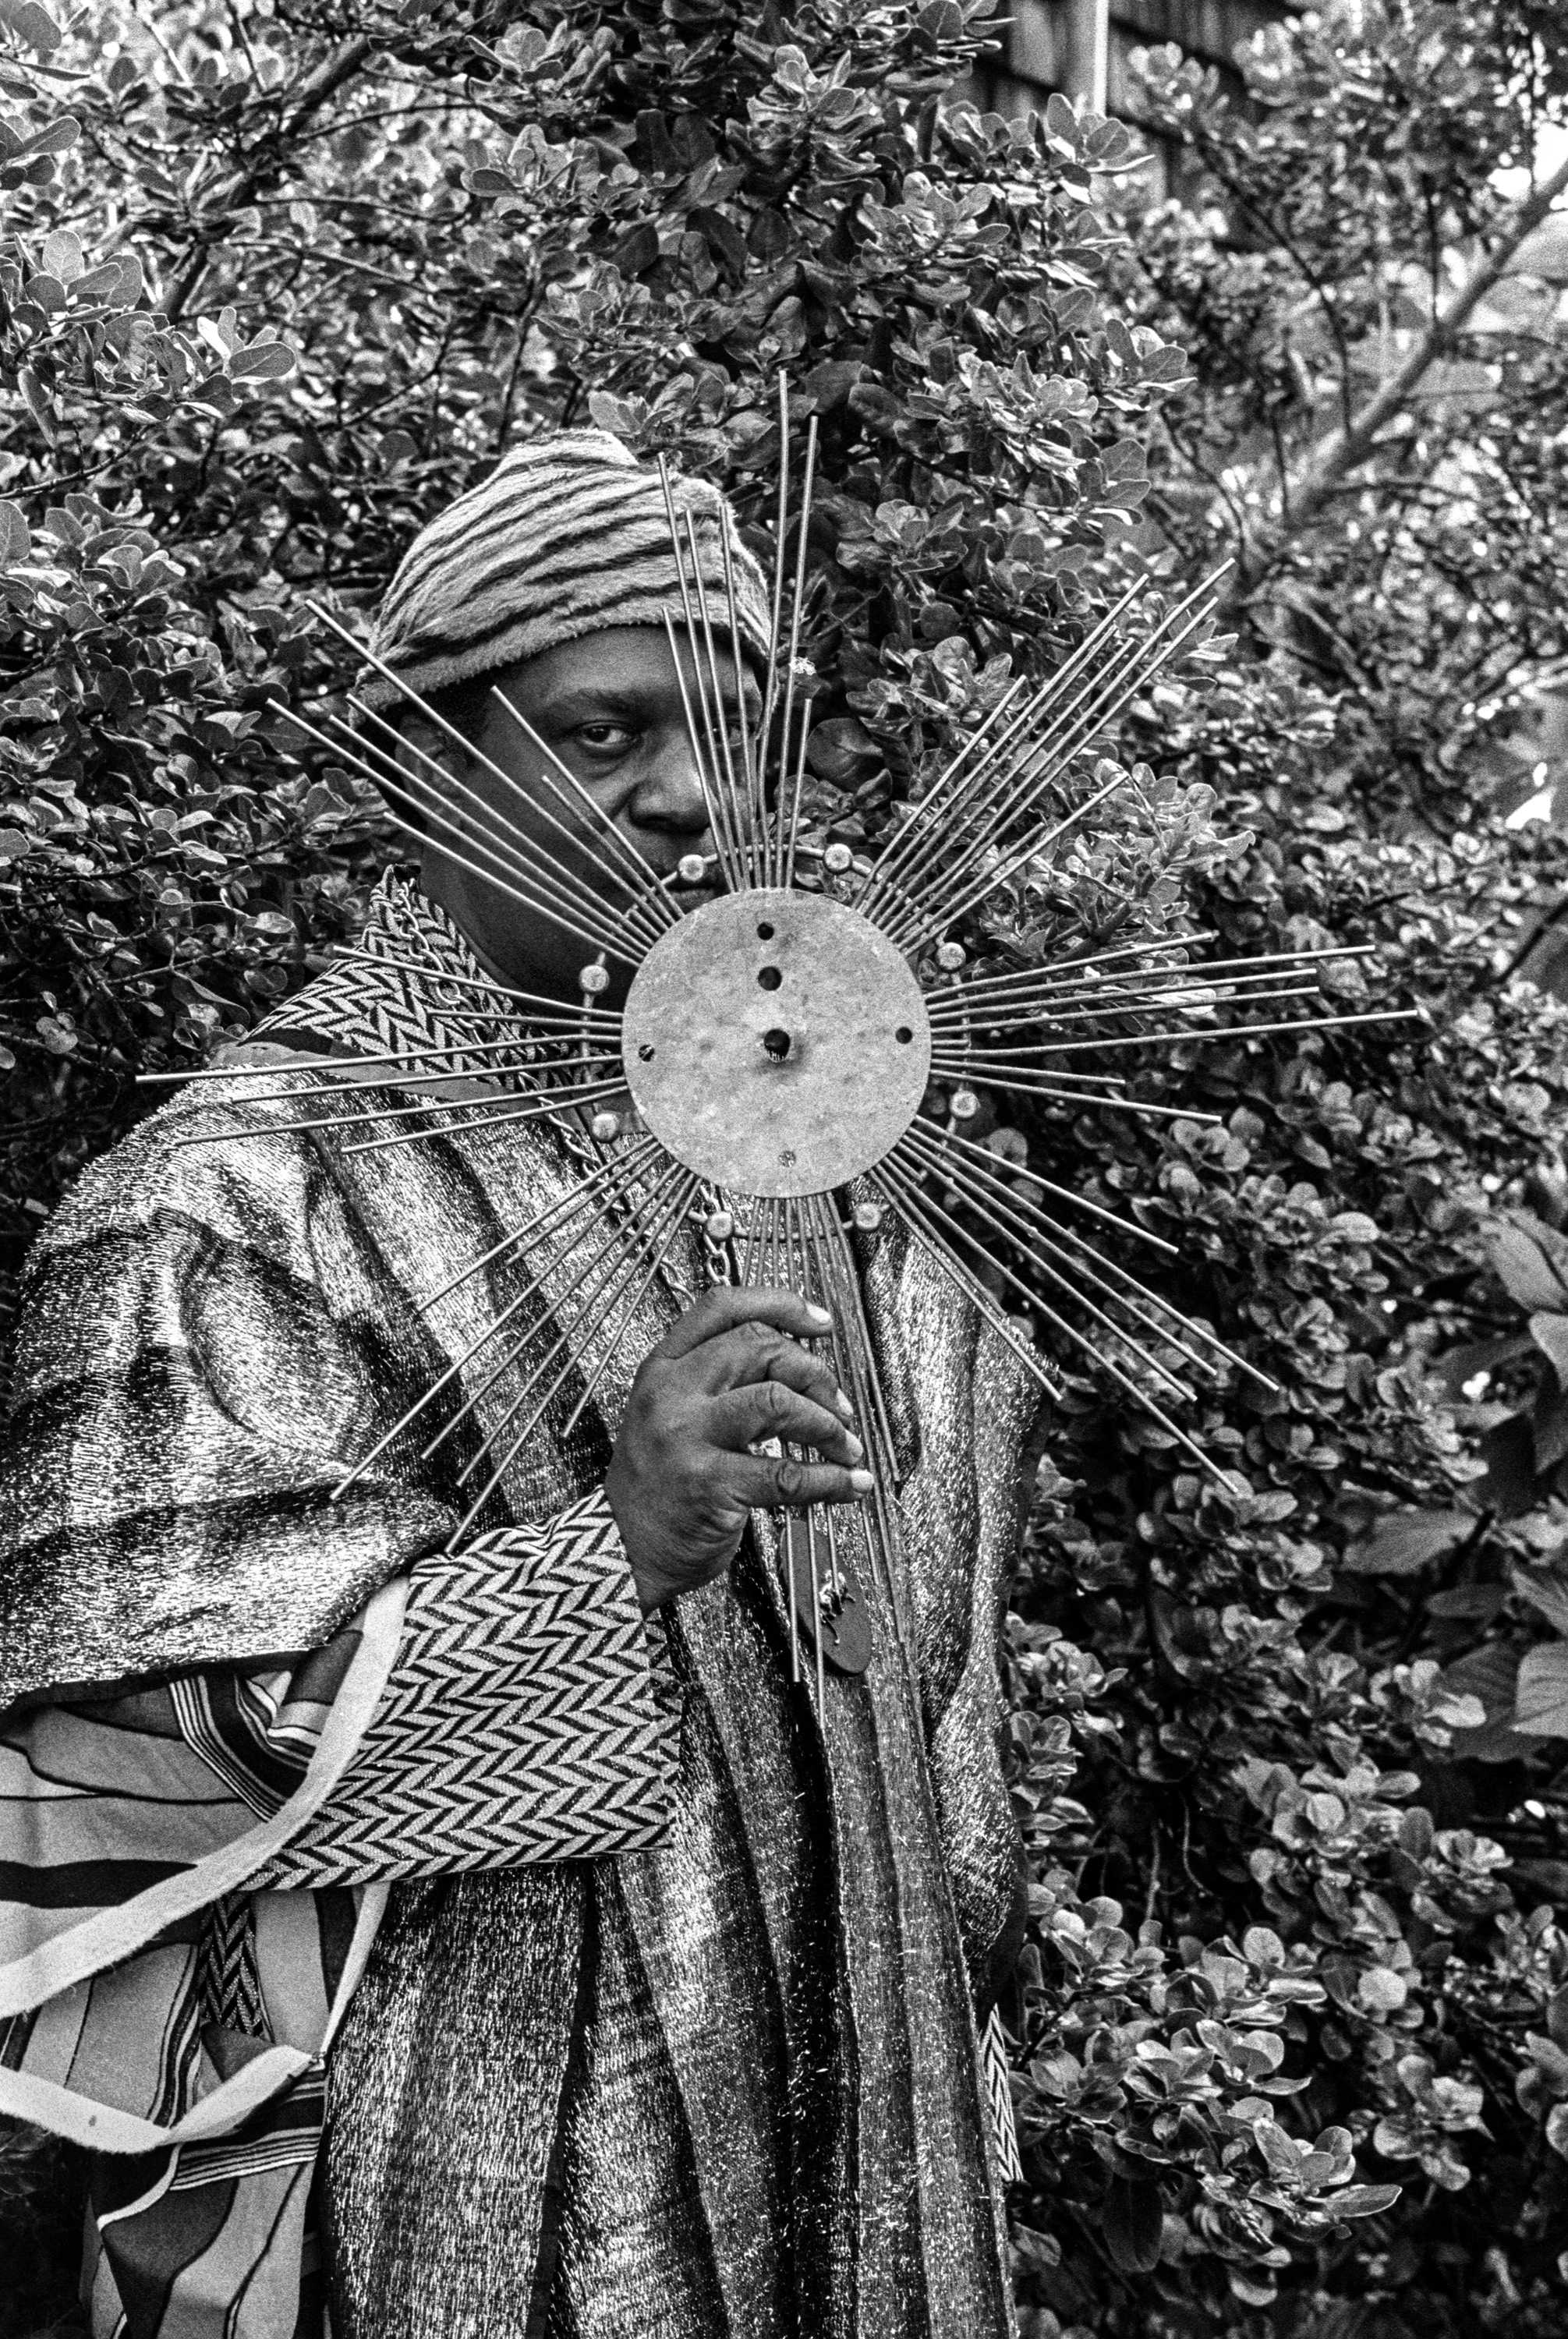 Sun Ra posing for a black and white photo with a large metal structure that looks like a sunburst in front of his face.